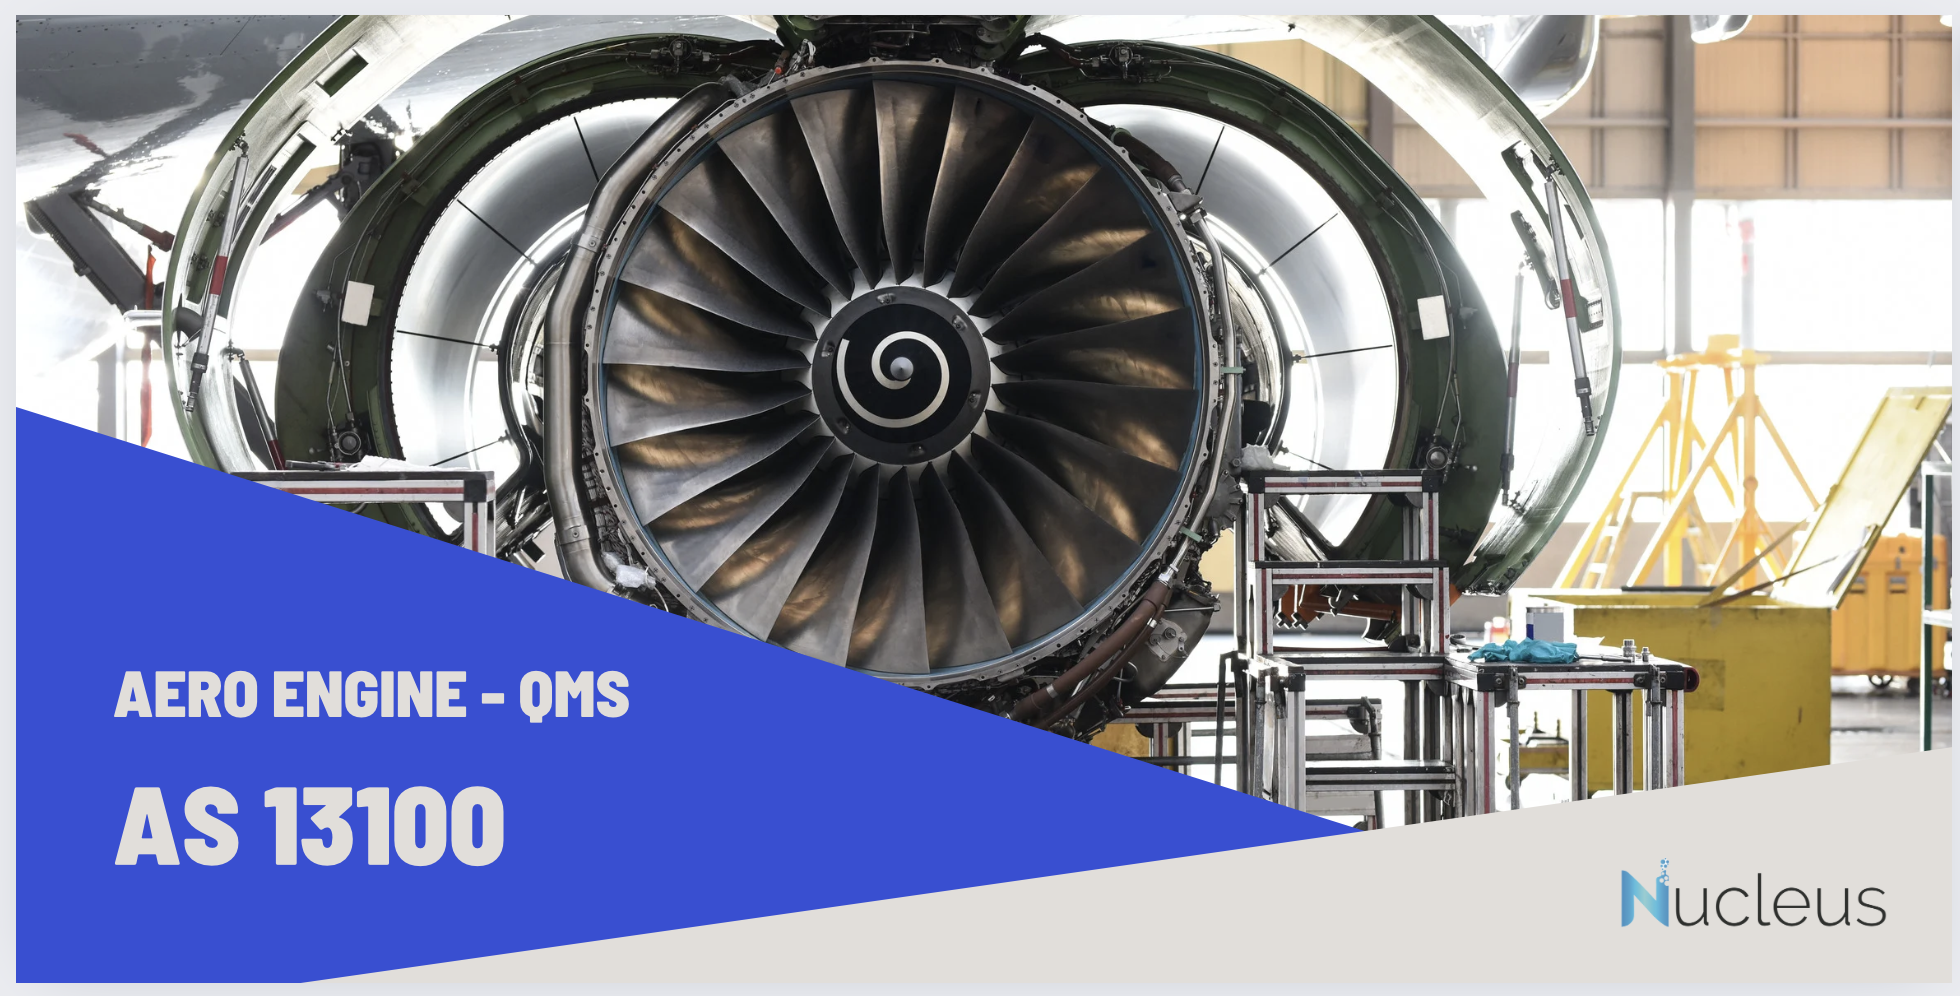 🚀 Are You Prepared for the QMS Approval Requirements in the Aero Engine Industry? 🚀